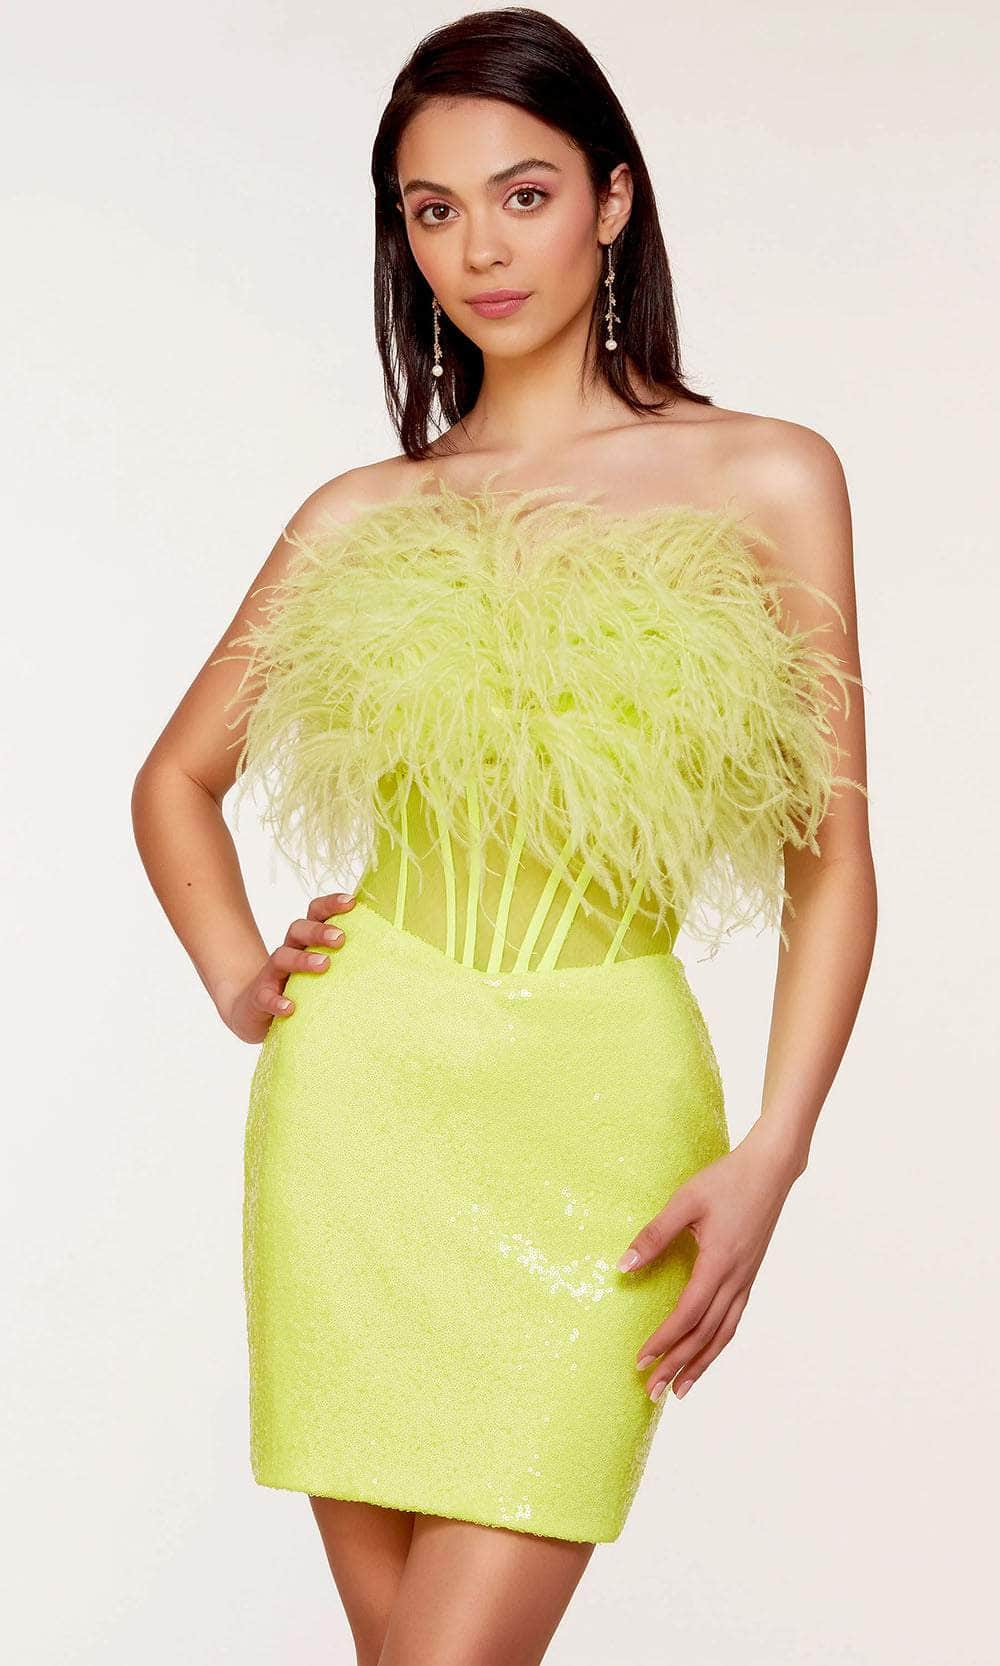 Alyce Paris 4799 - Strapless Feathered Corset Homecoming Dress Special Occasion Dress 000 / Citronelle